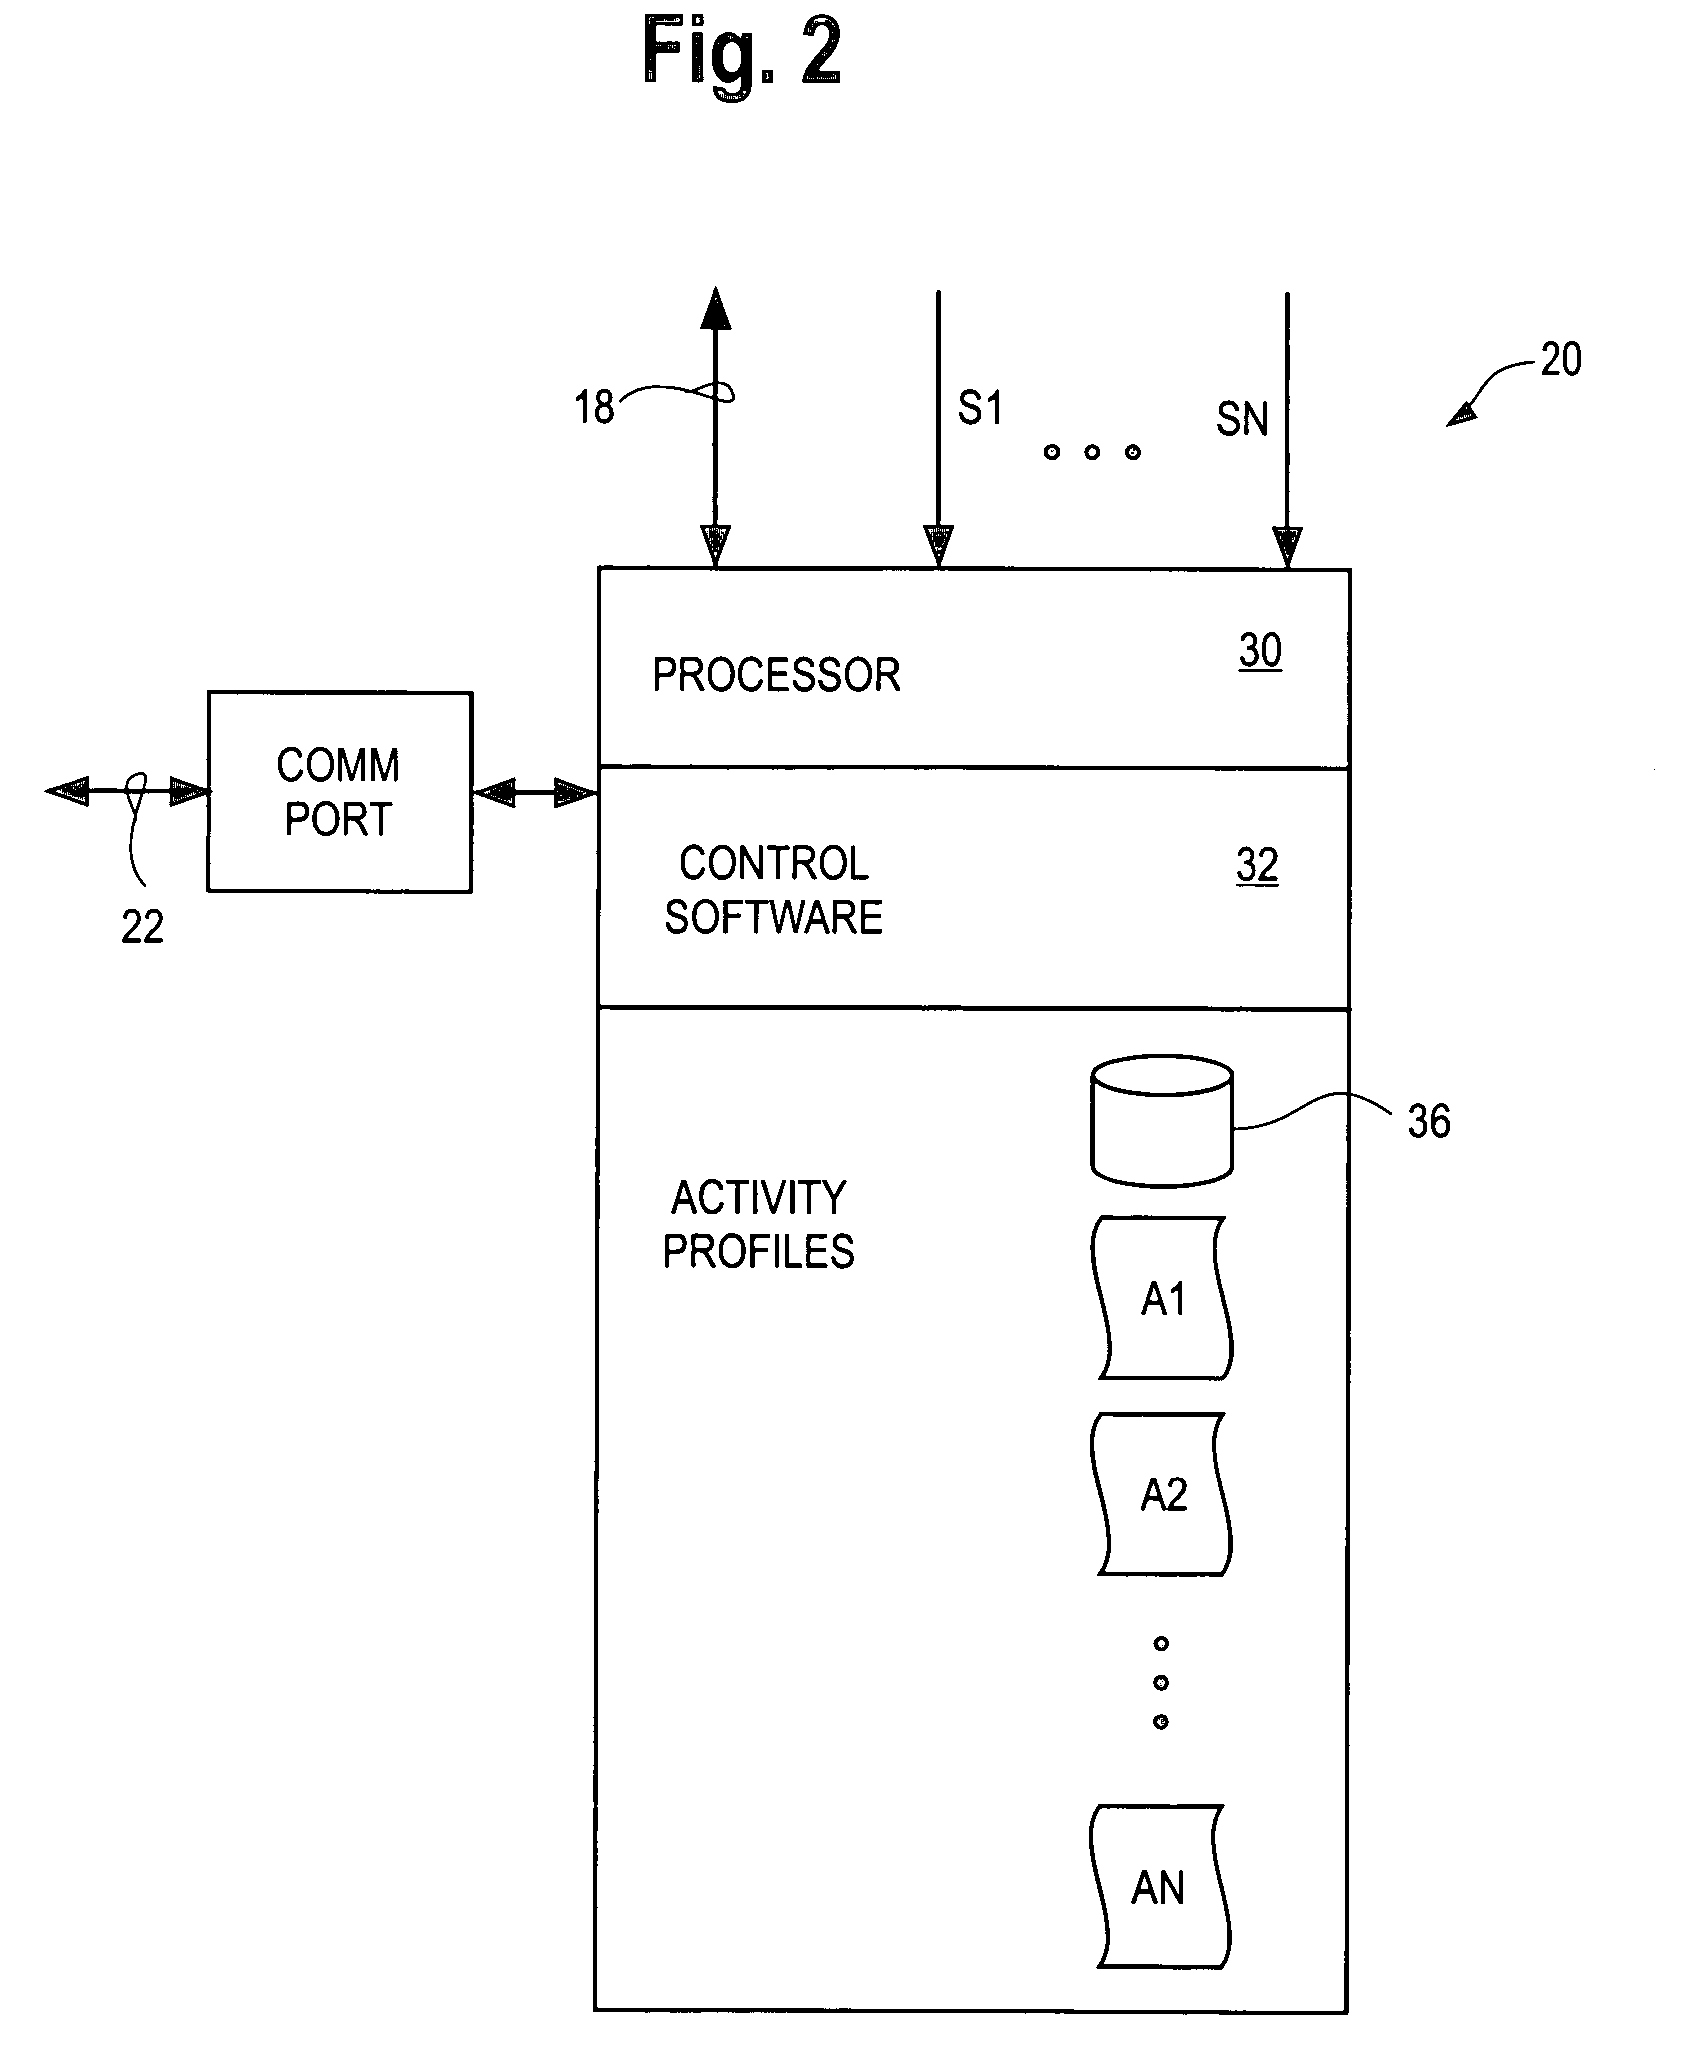 System for monitoring activities and location